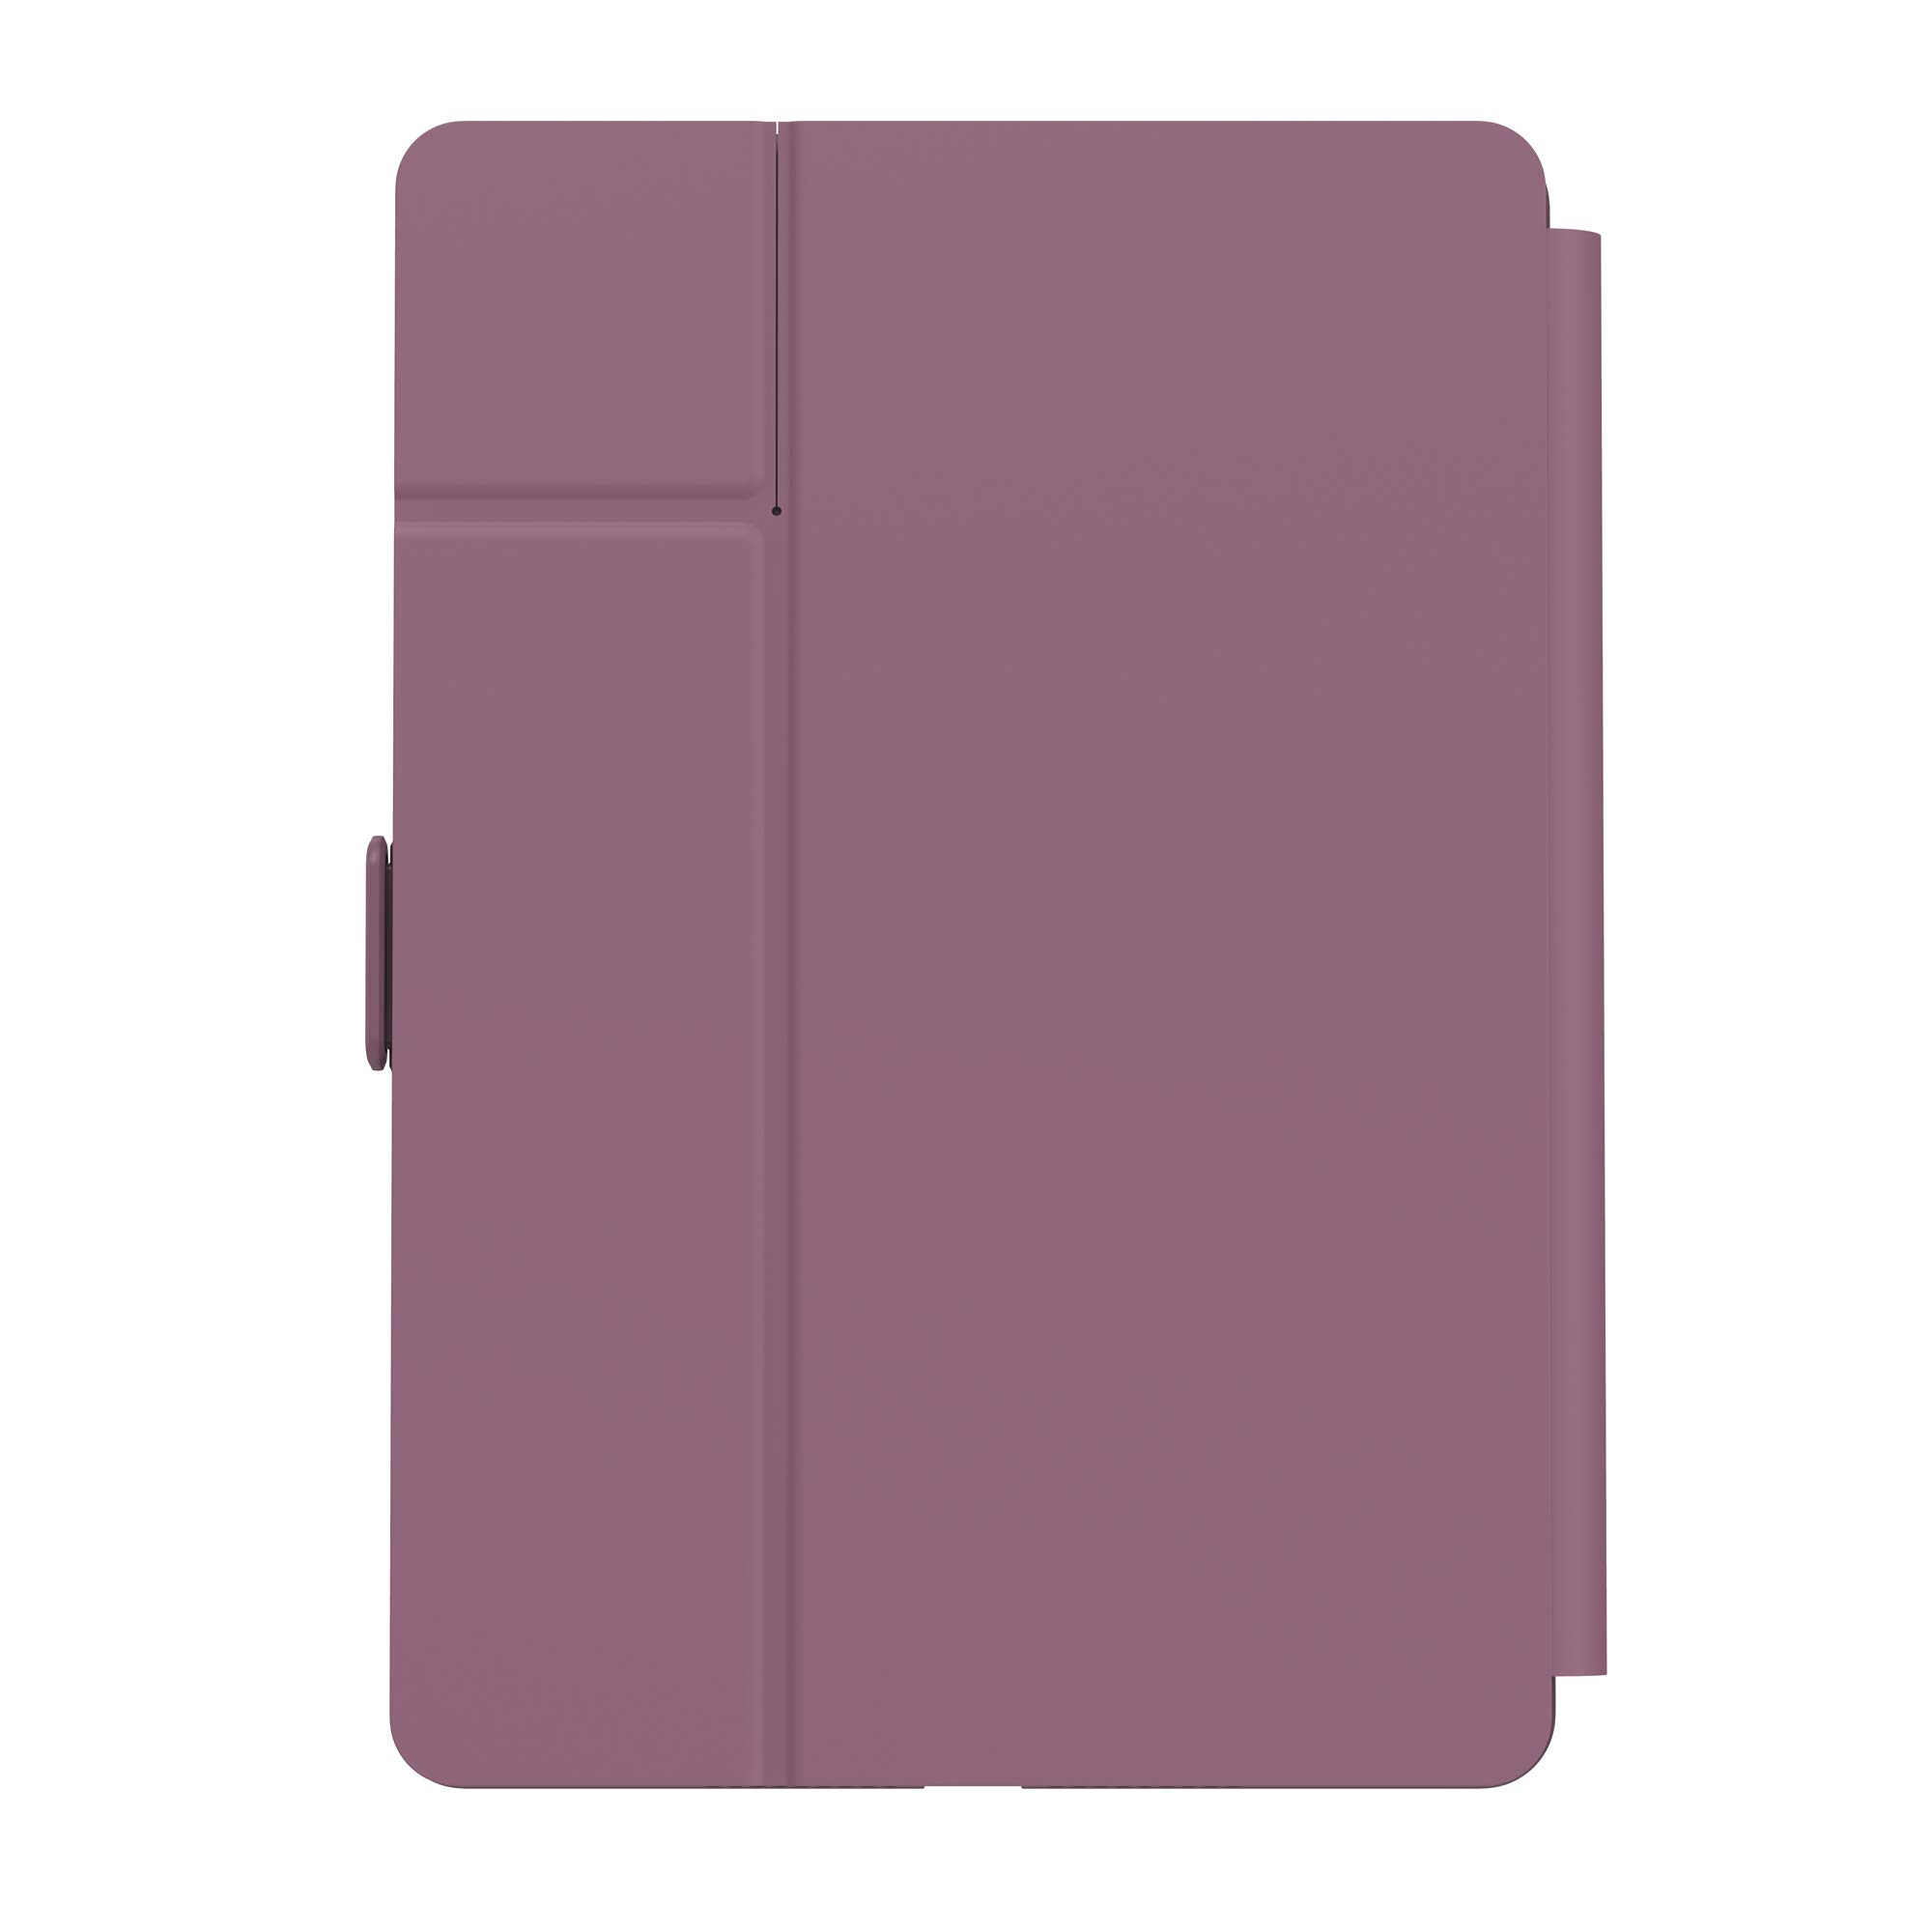 Speck Products BalanceFolio iPad 10.2 Inch Case and Stand (2019), Plumberry Purple/Crushed Purple/Crepe Pink, Model:133535-7265